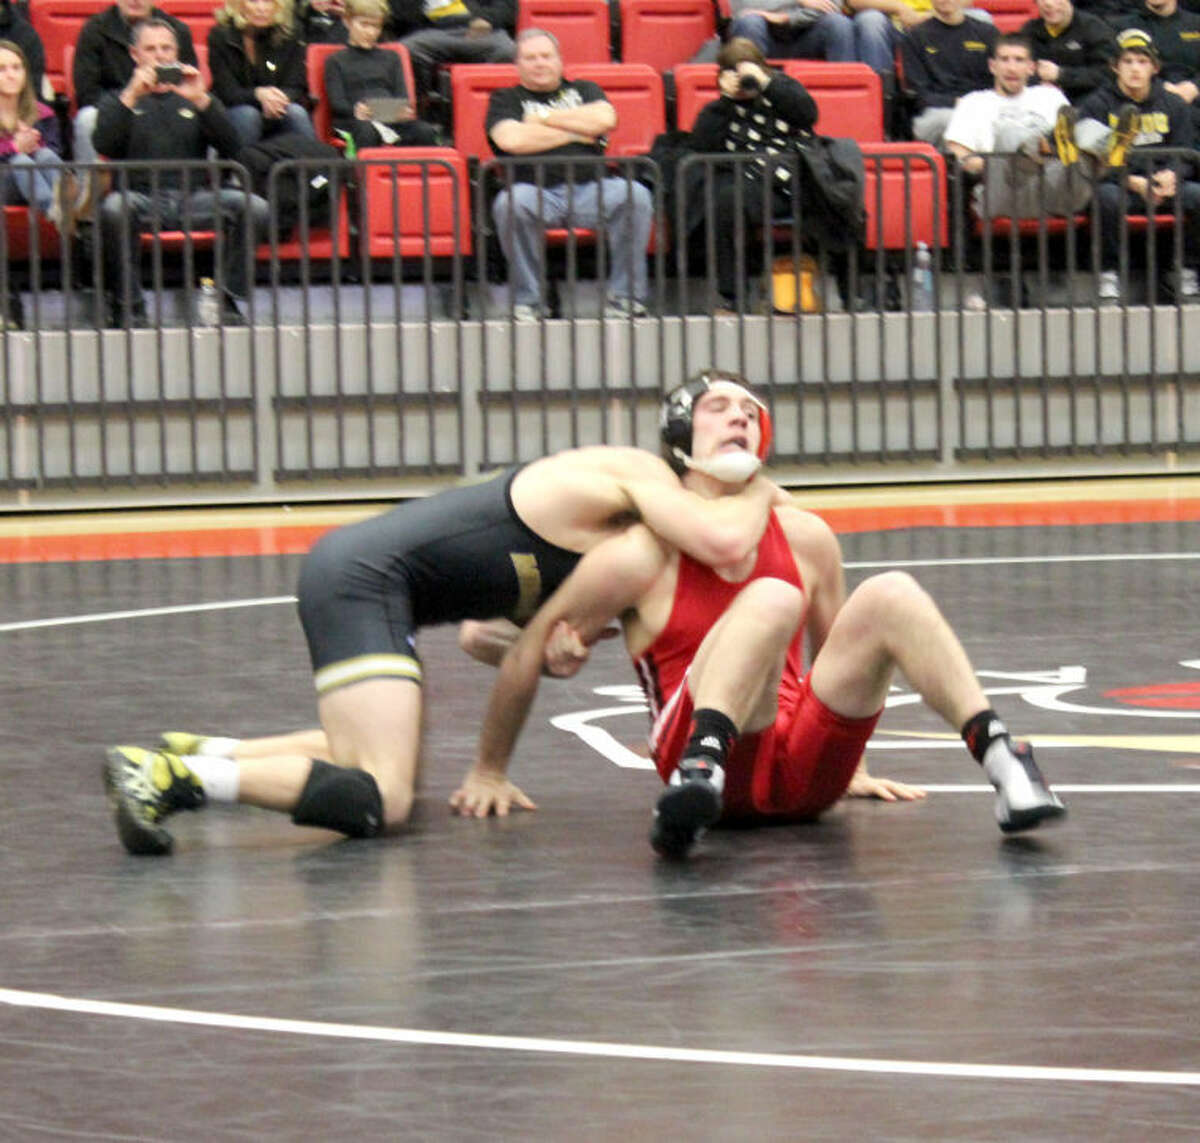 SIUE’s Karsten Van Velsor tries to get out of a hold during his 149-pound match against Missouri’s Blake Pepper.